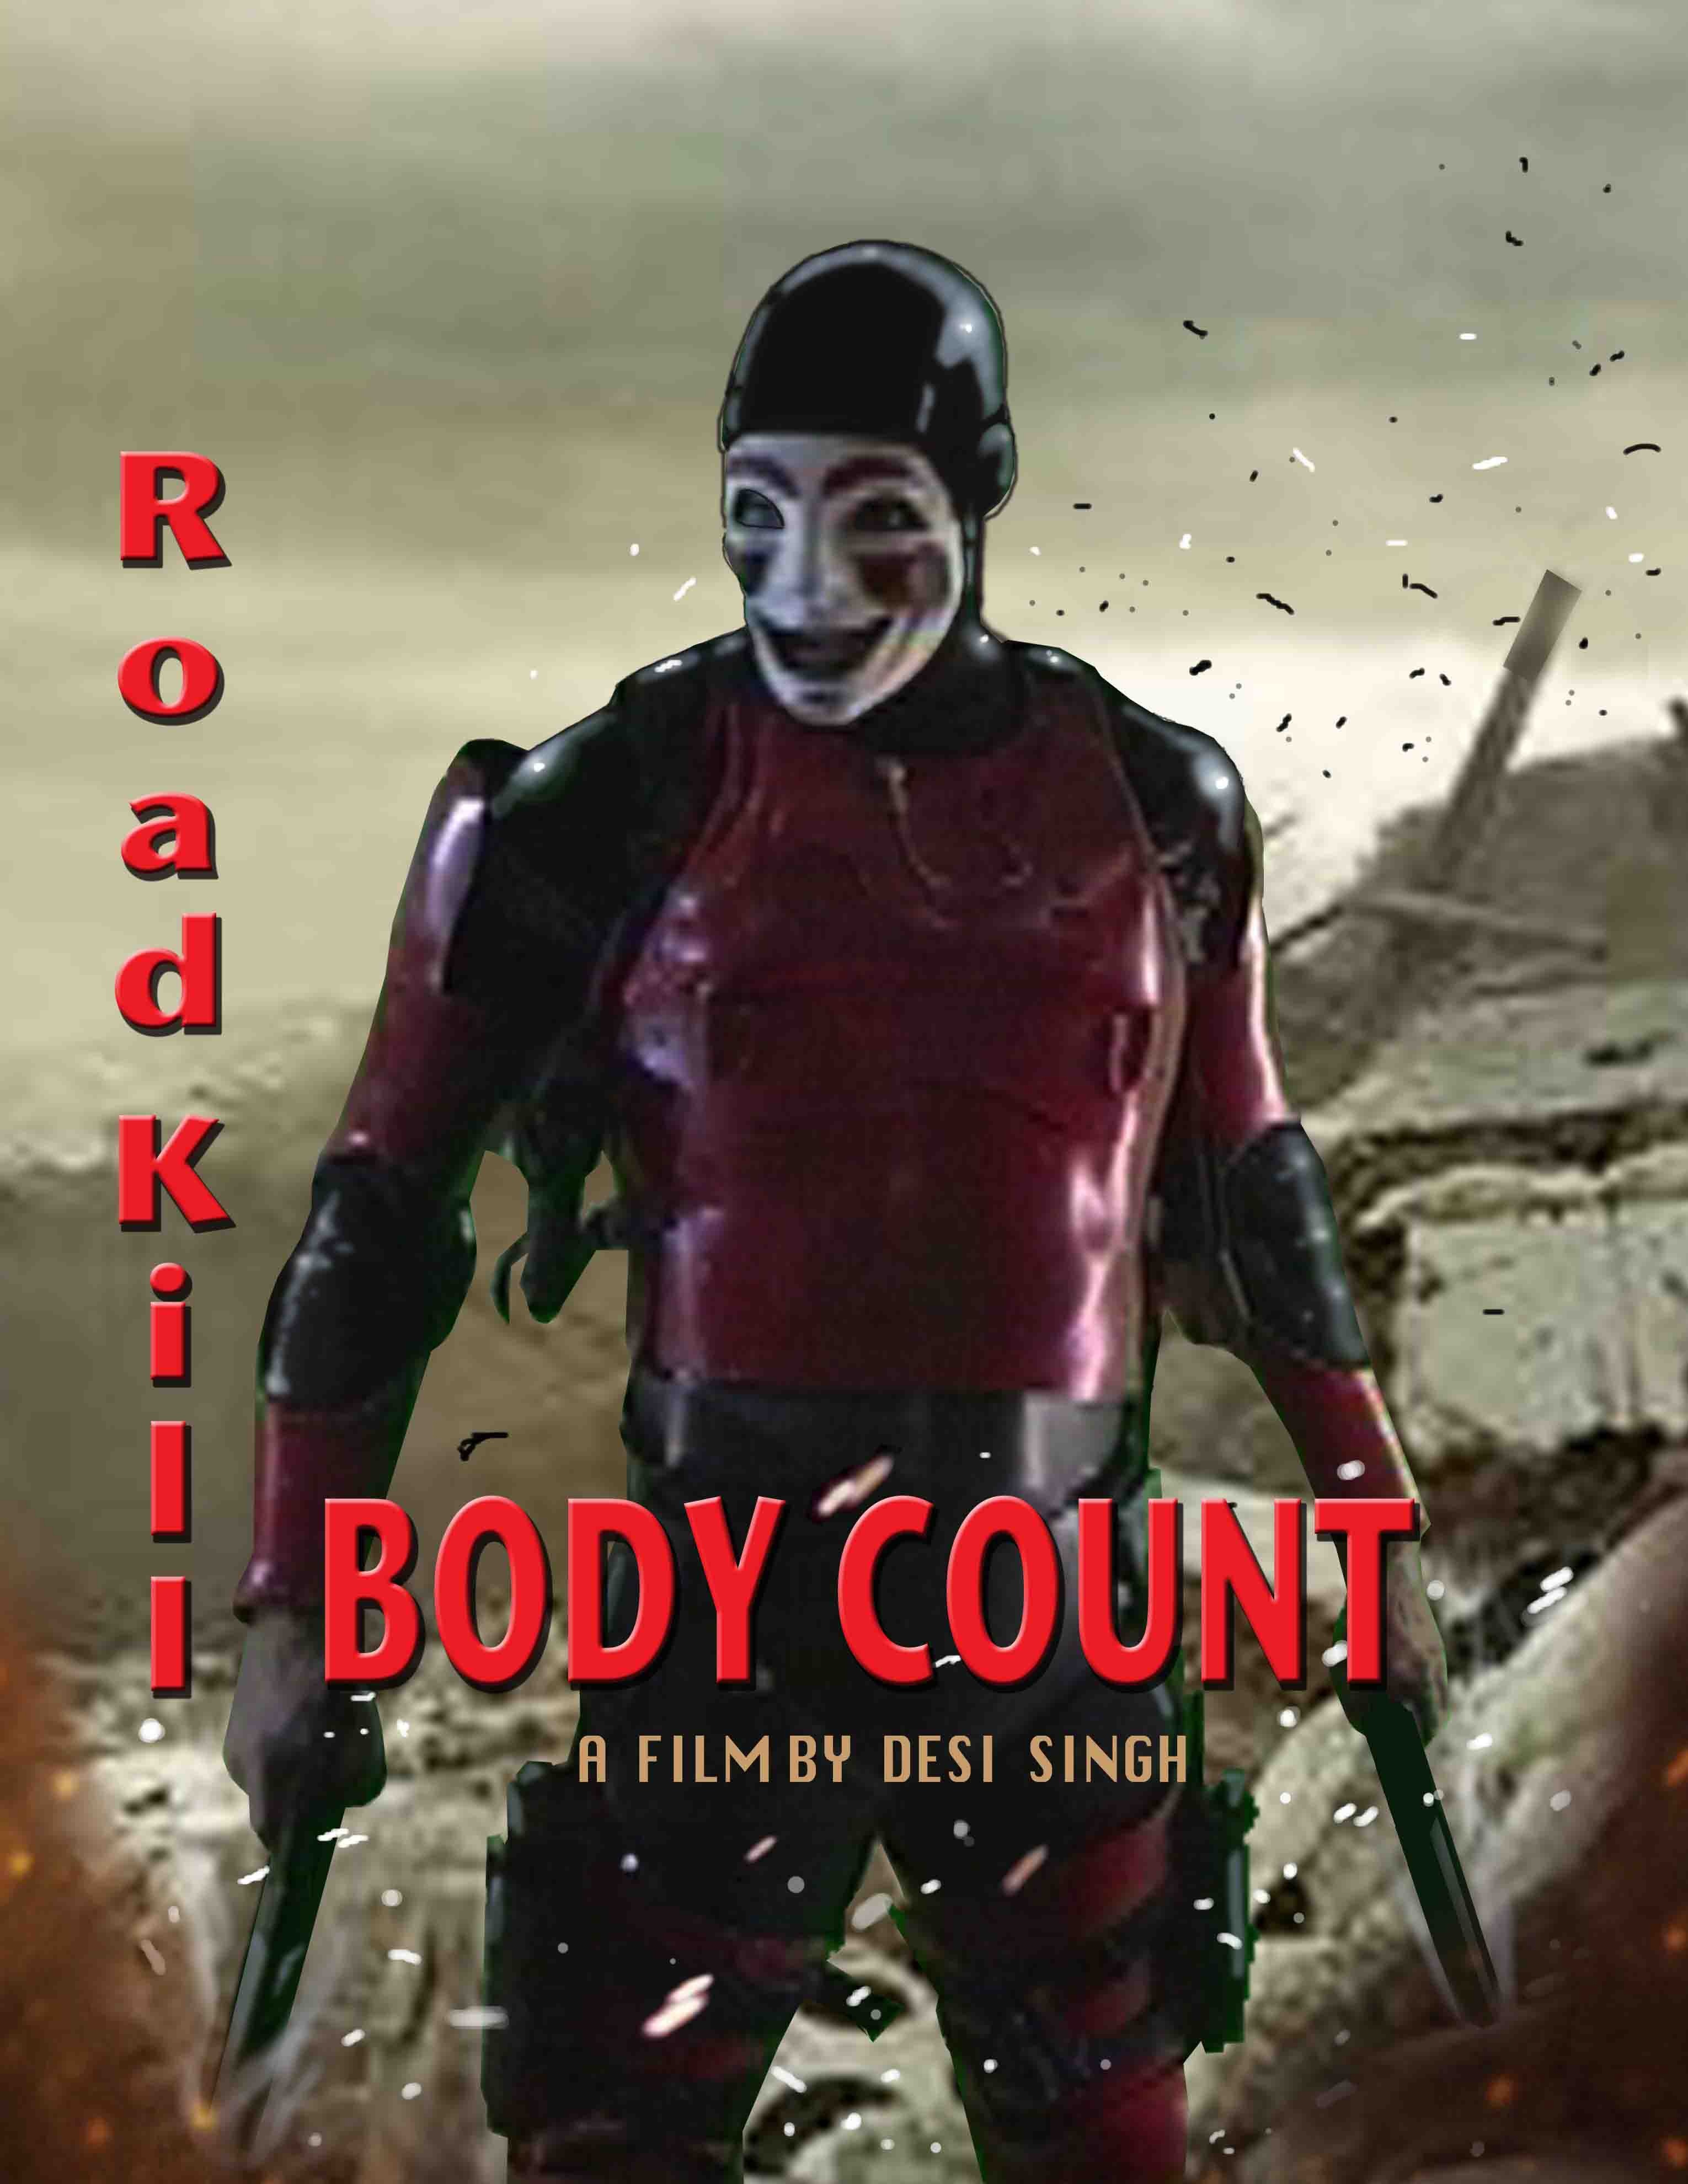 Concept Poster for Body Count